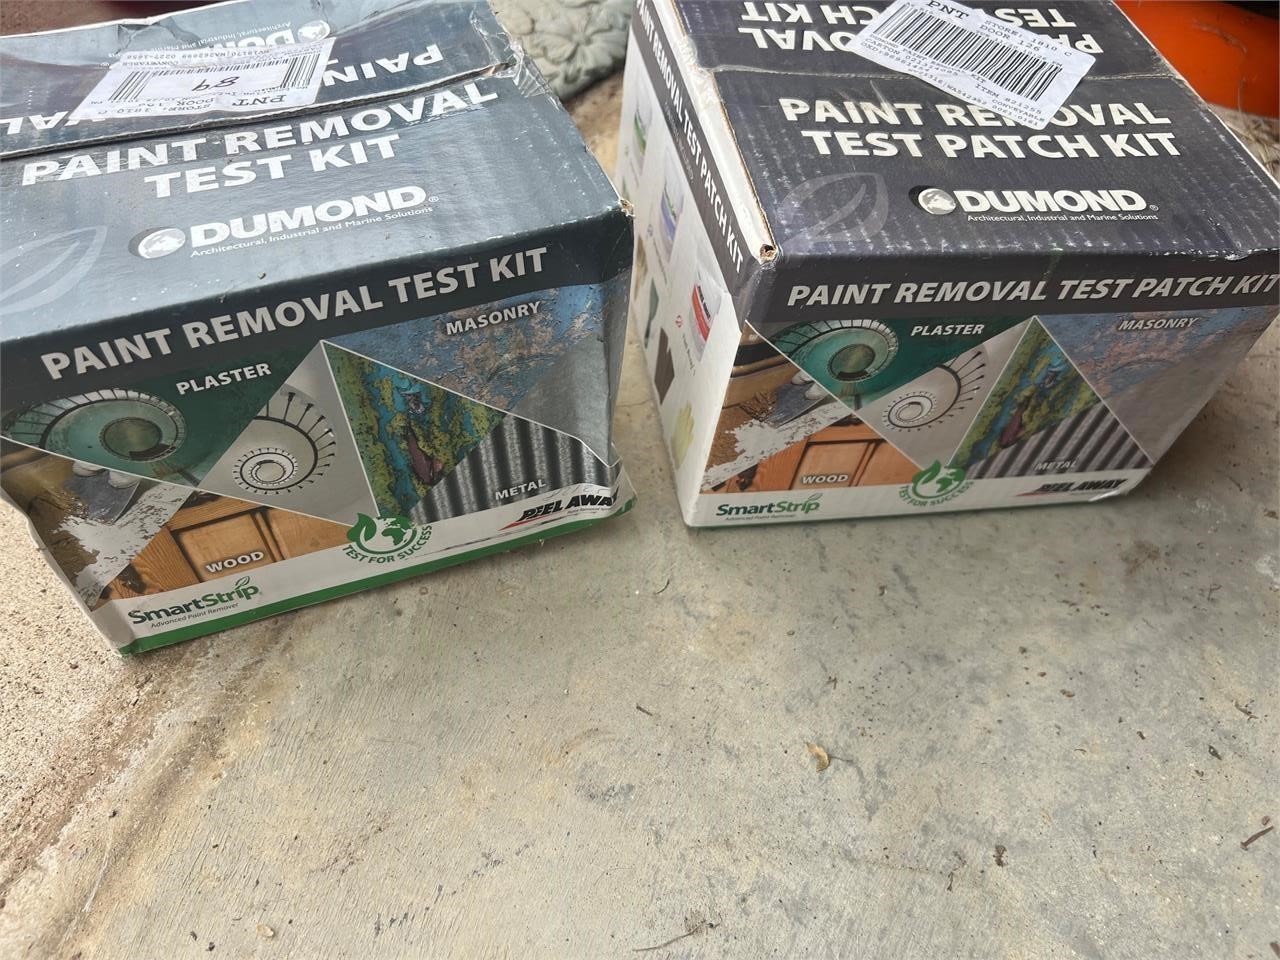 TWO PAINT REMOVAL TEST KITS